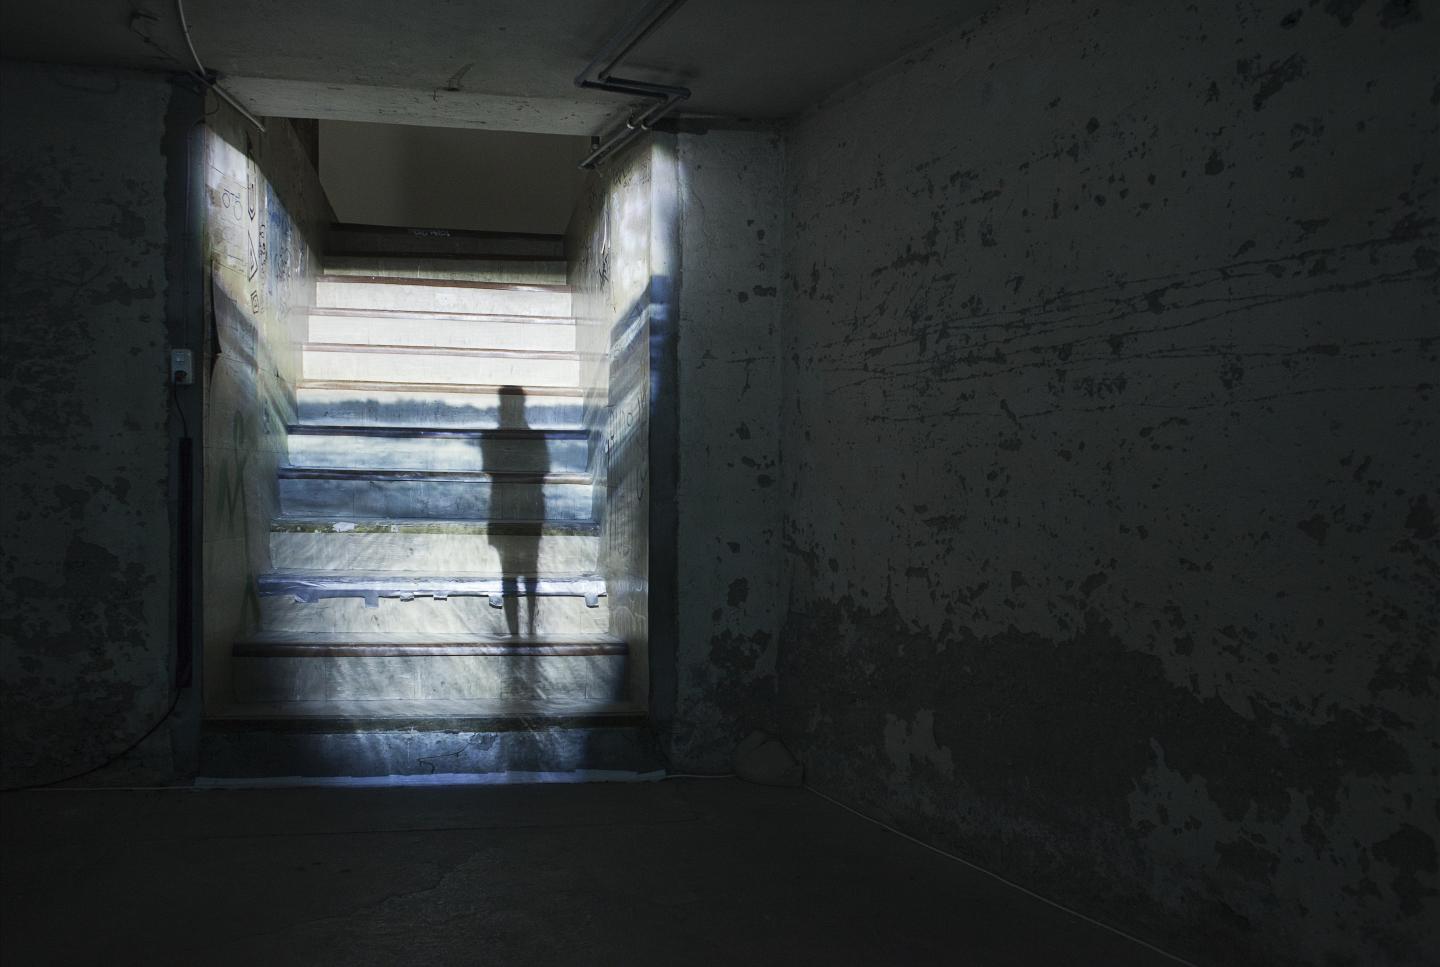 projection of figure (artist) standing in front of ocean, projected on staircase